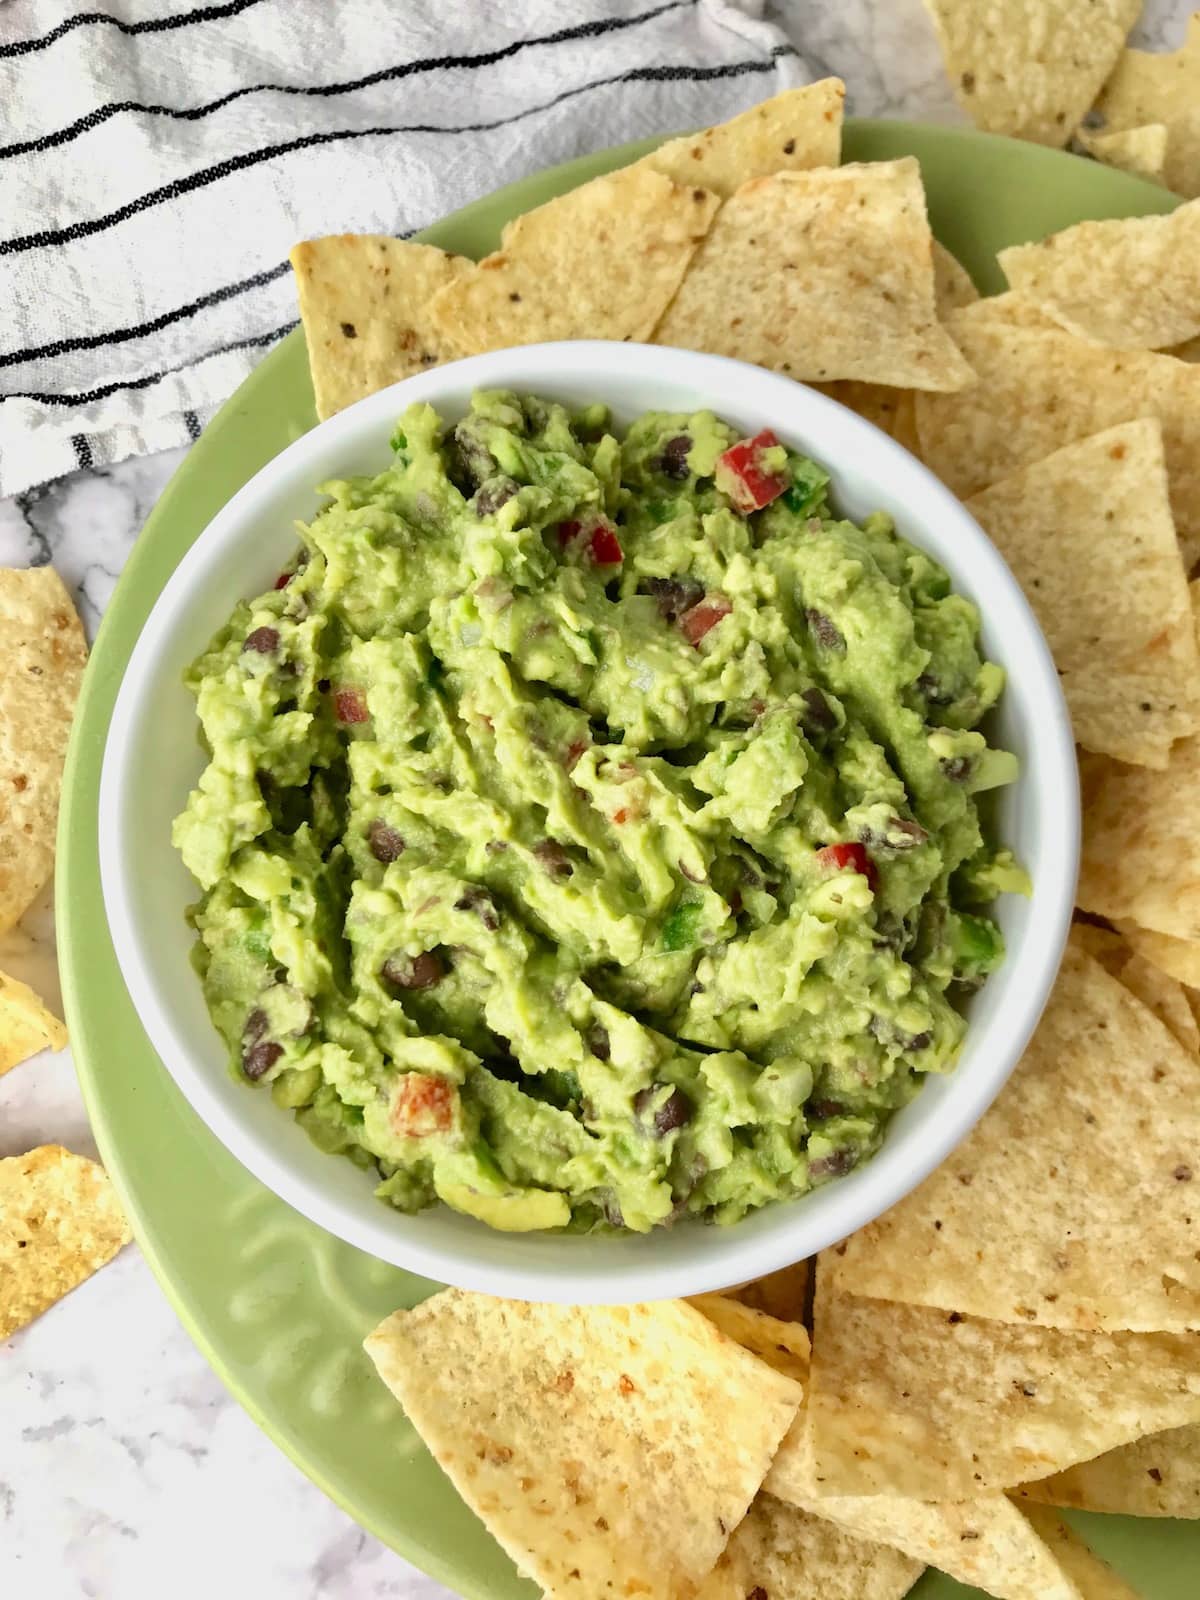 A bowl of black bean guacamole on a plate with tortilla chips.